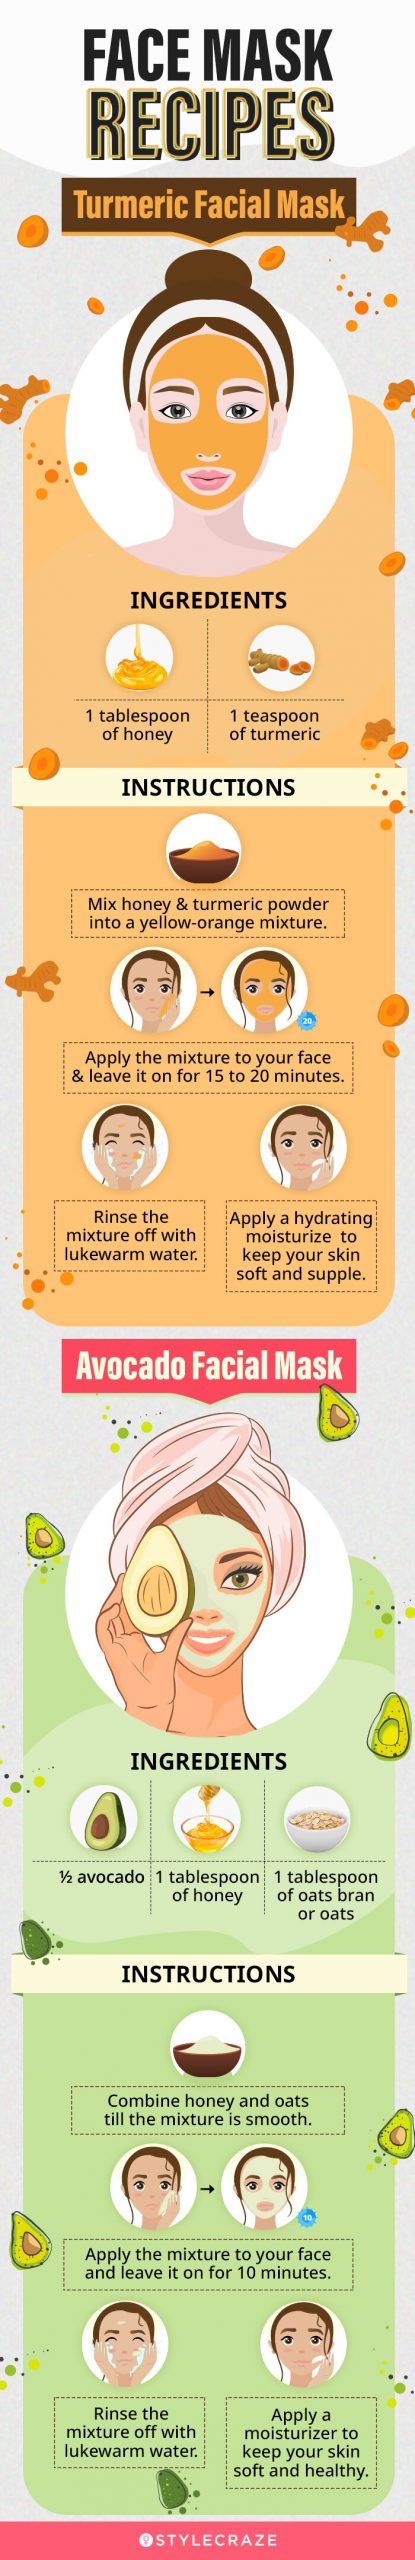 face mask recipes [infographic]